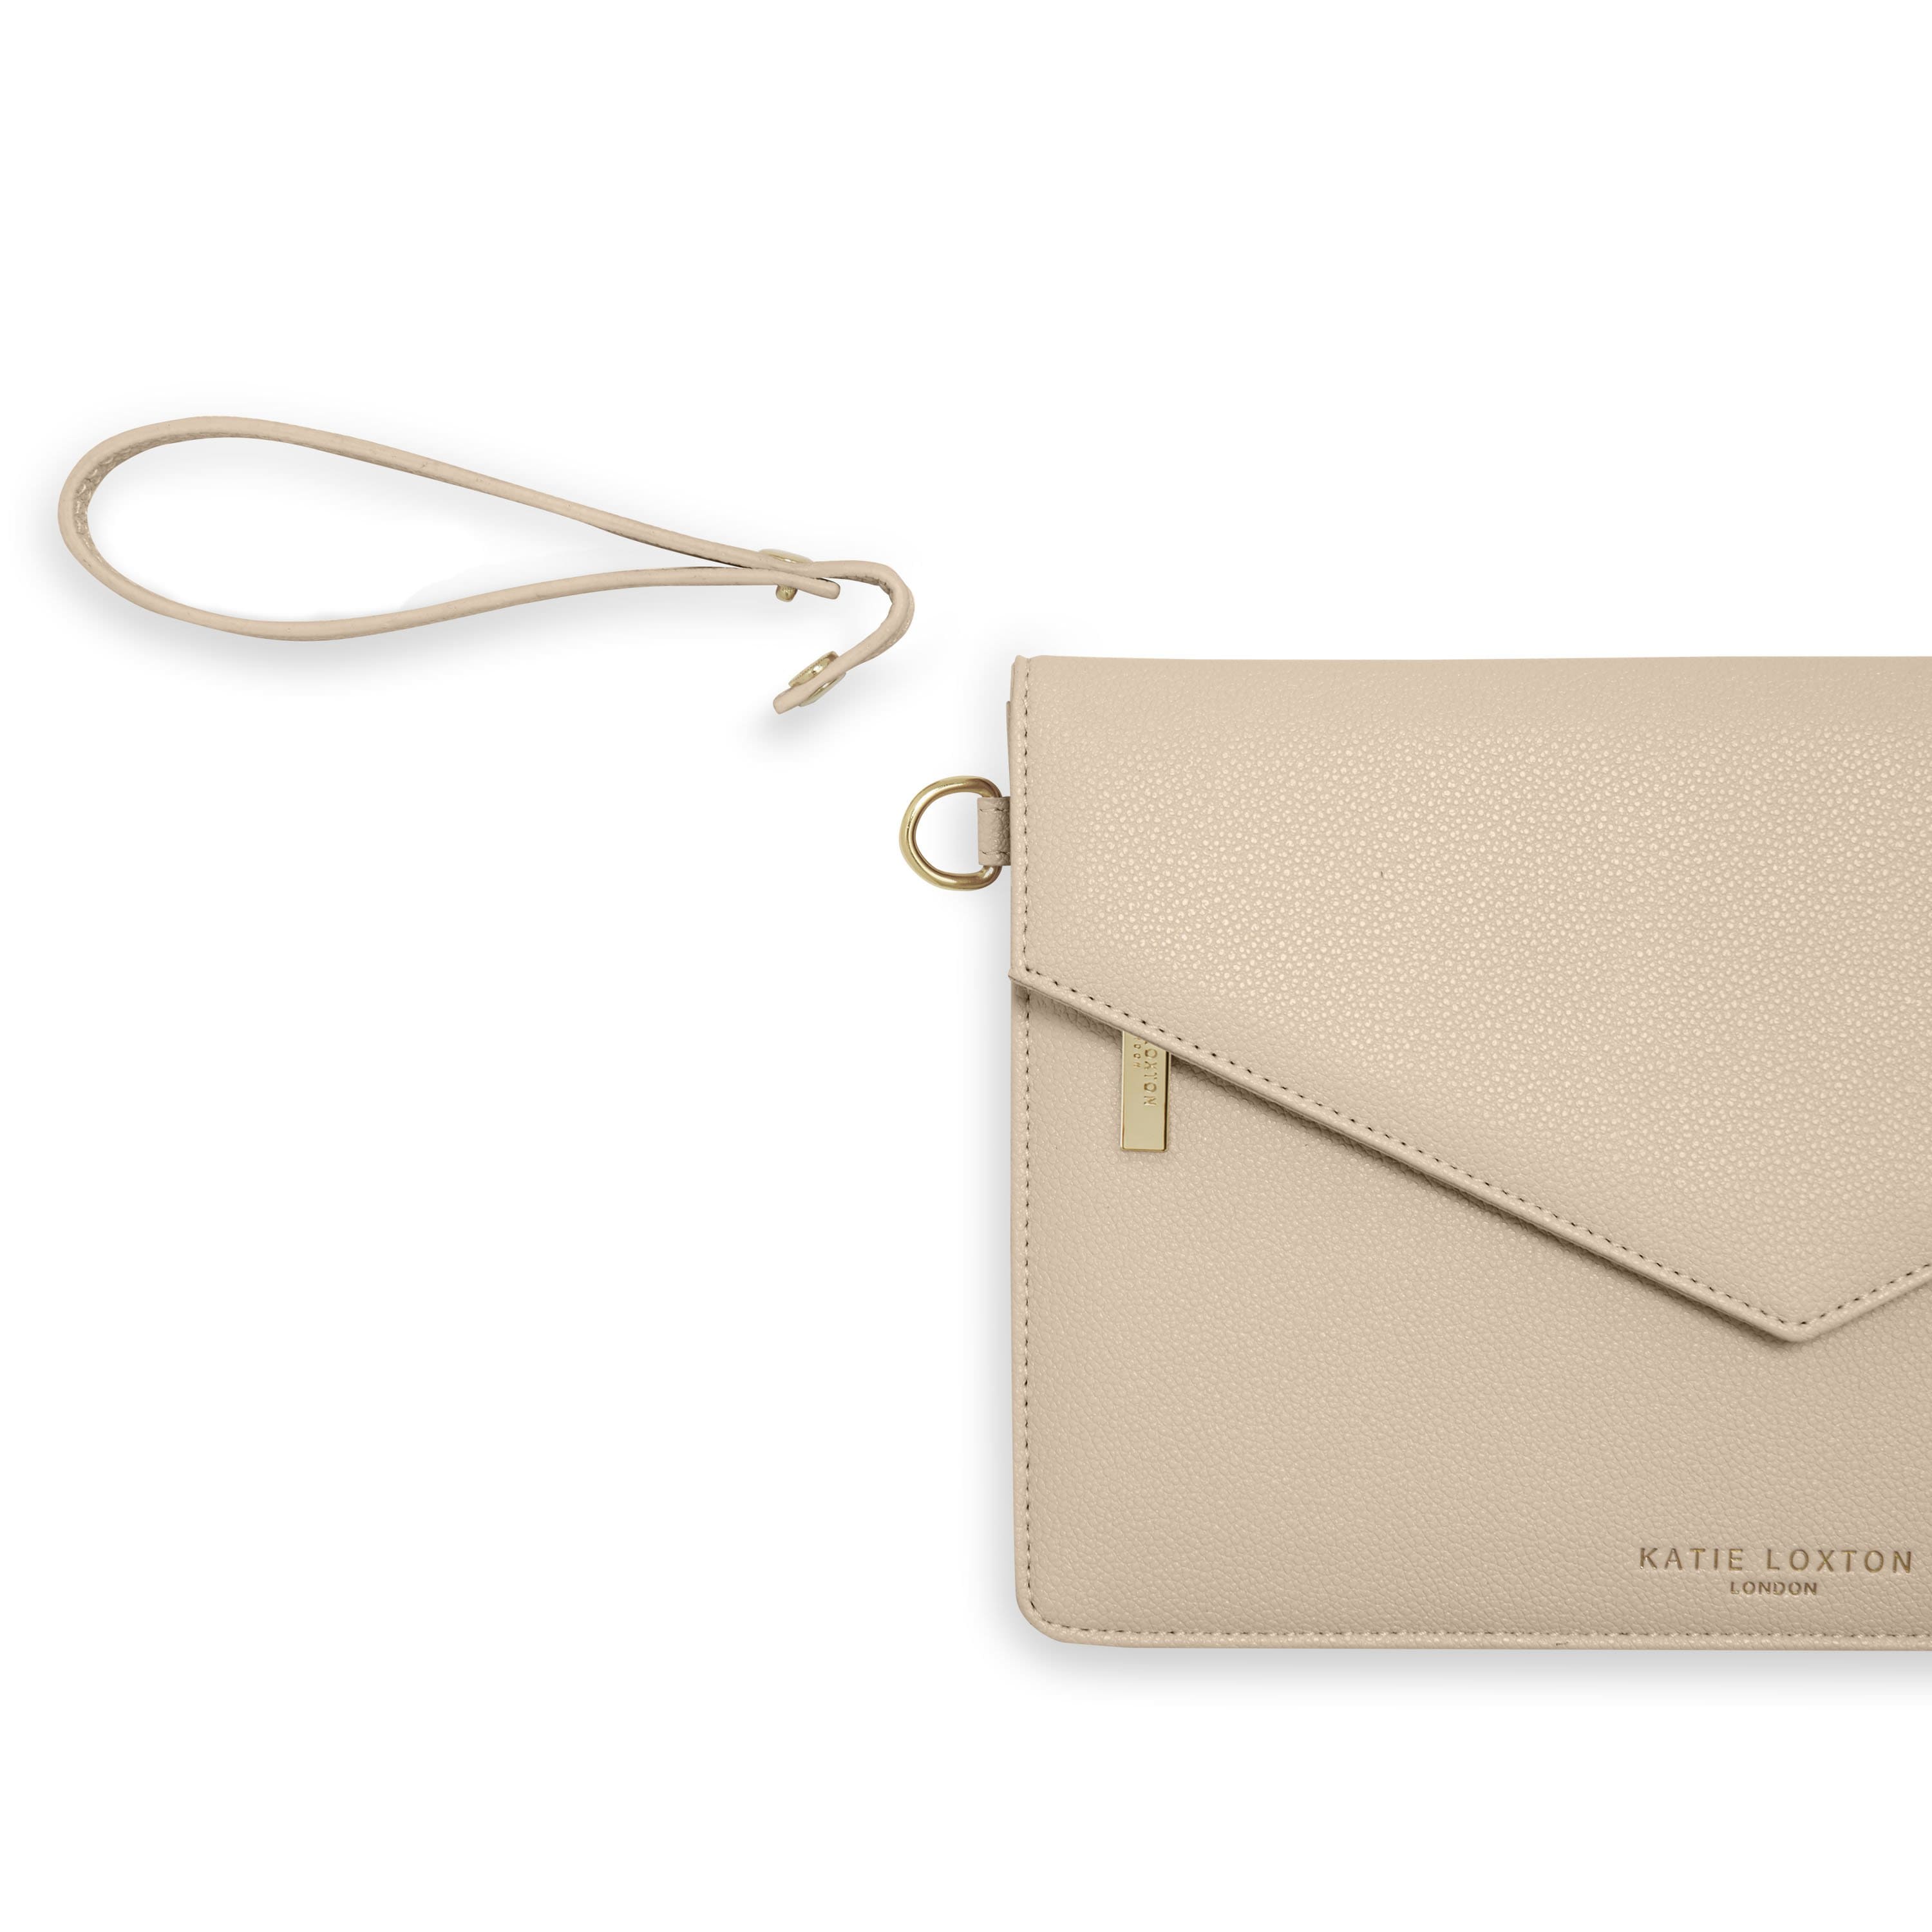 Katie Loxton Gifts One Size Katie Loxton Esme Envelope Nude Pink Clutch Bag KLB797 izzi-of-baslow